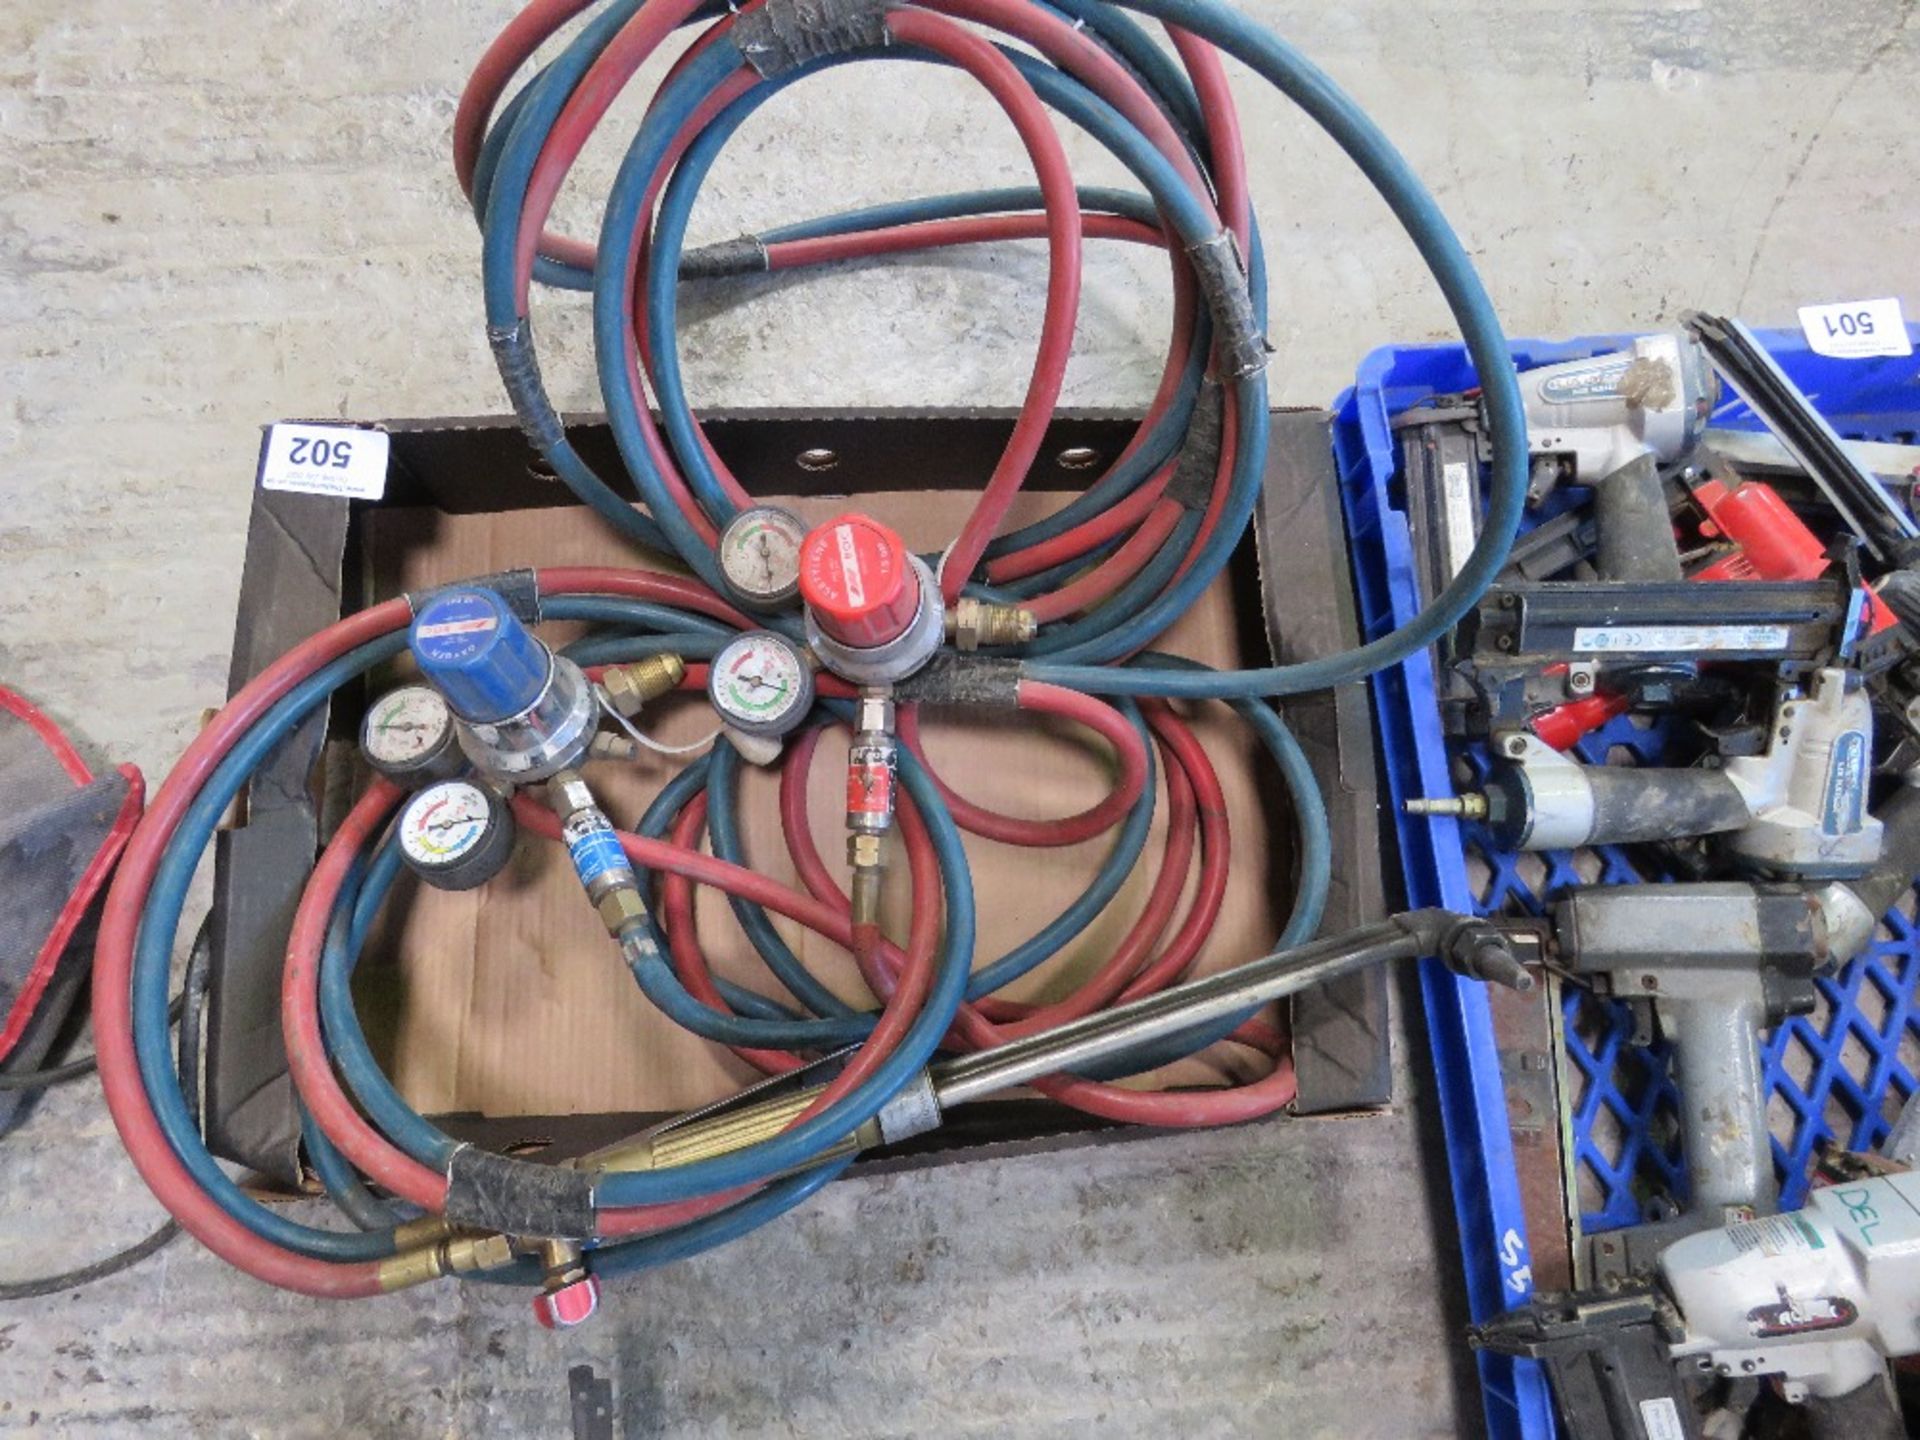 GAS CUTTING HOSES AND EQUIPMENT. - Image 3 of 3